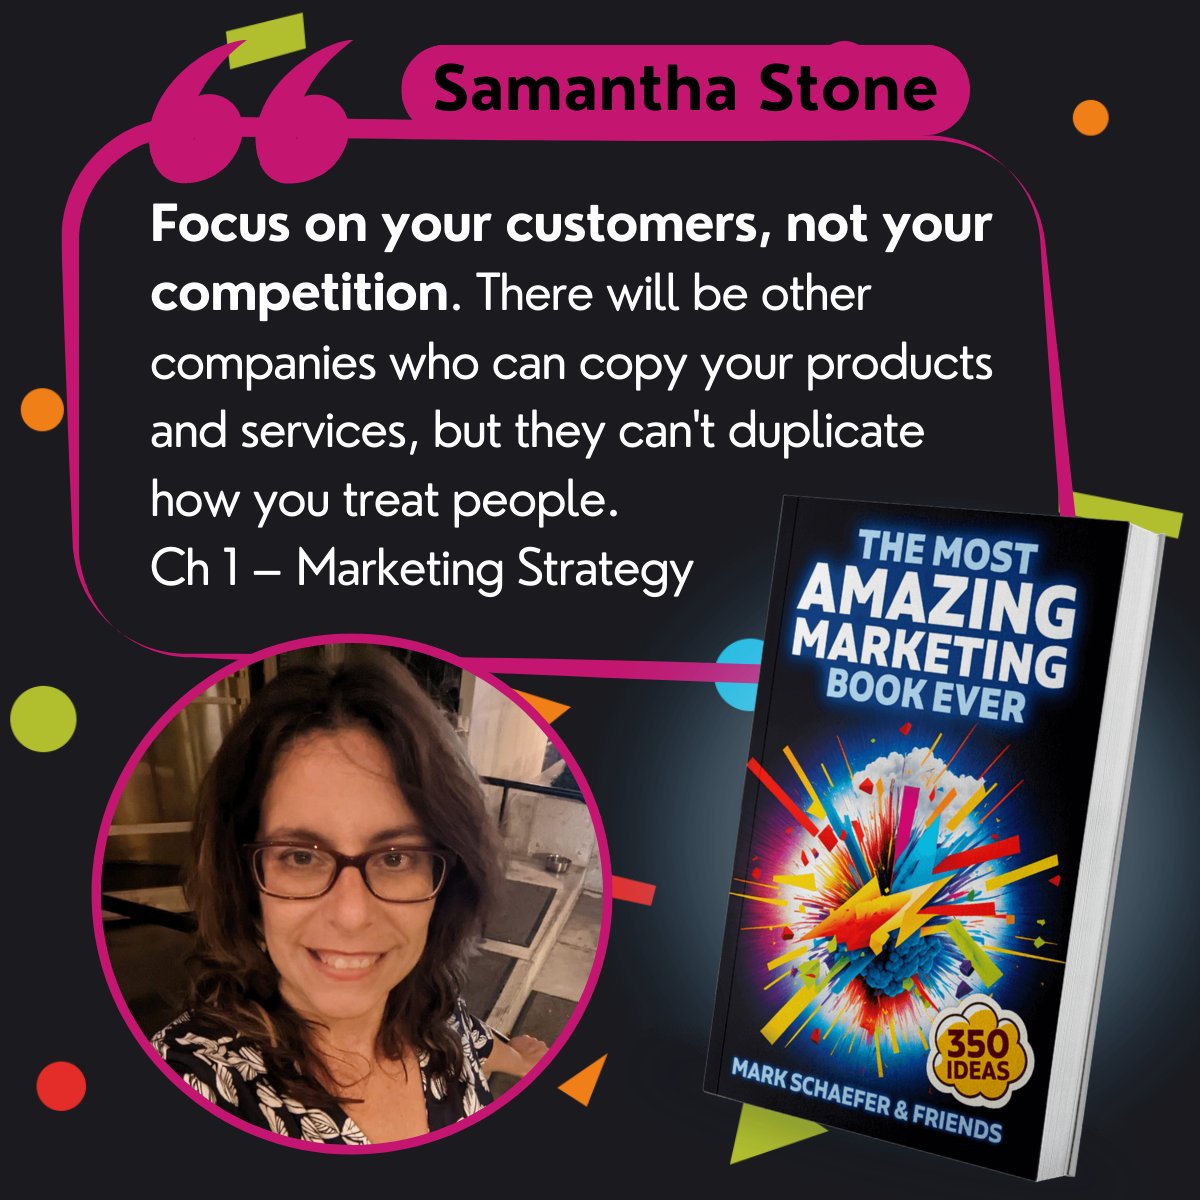 In Chapter 1 of The Most Amazing Marketing Book Ever, @samanthastone talks marketing strategy. One highlight is to focus on your customers, not your competition! Get your copy & 349 more tips here (or DM me!): bit.ly/TMAMBE_MEMS #TMAMBE #AmazingMarketingBook #marketing